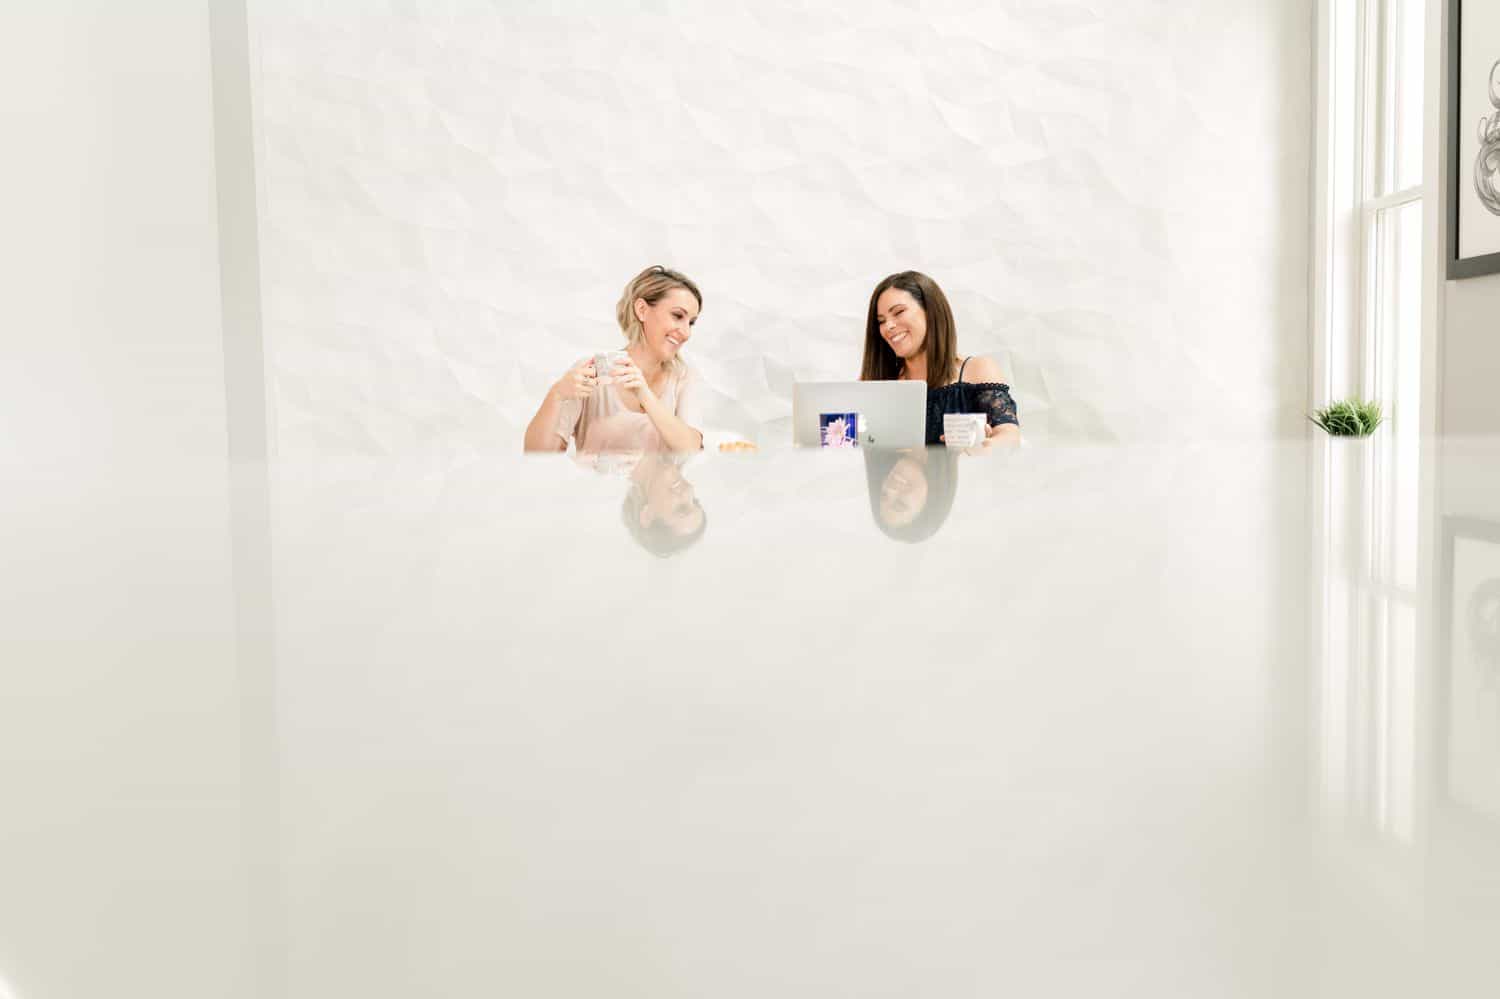 Two business women sit at a large reflective desk in a white room